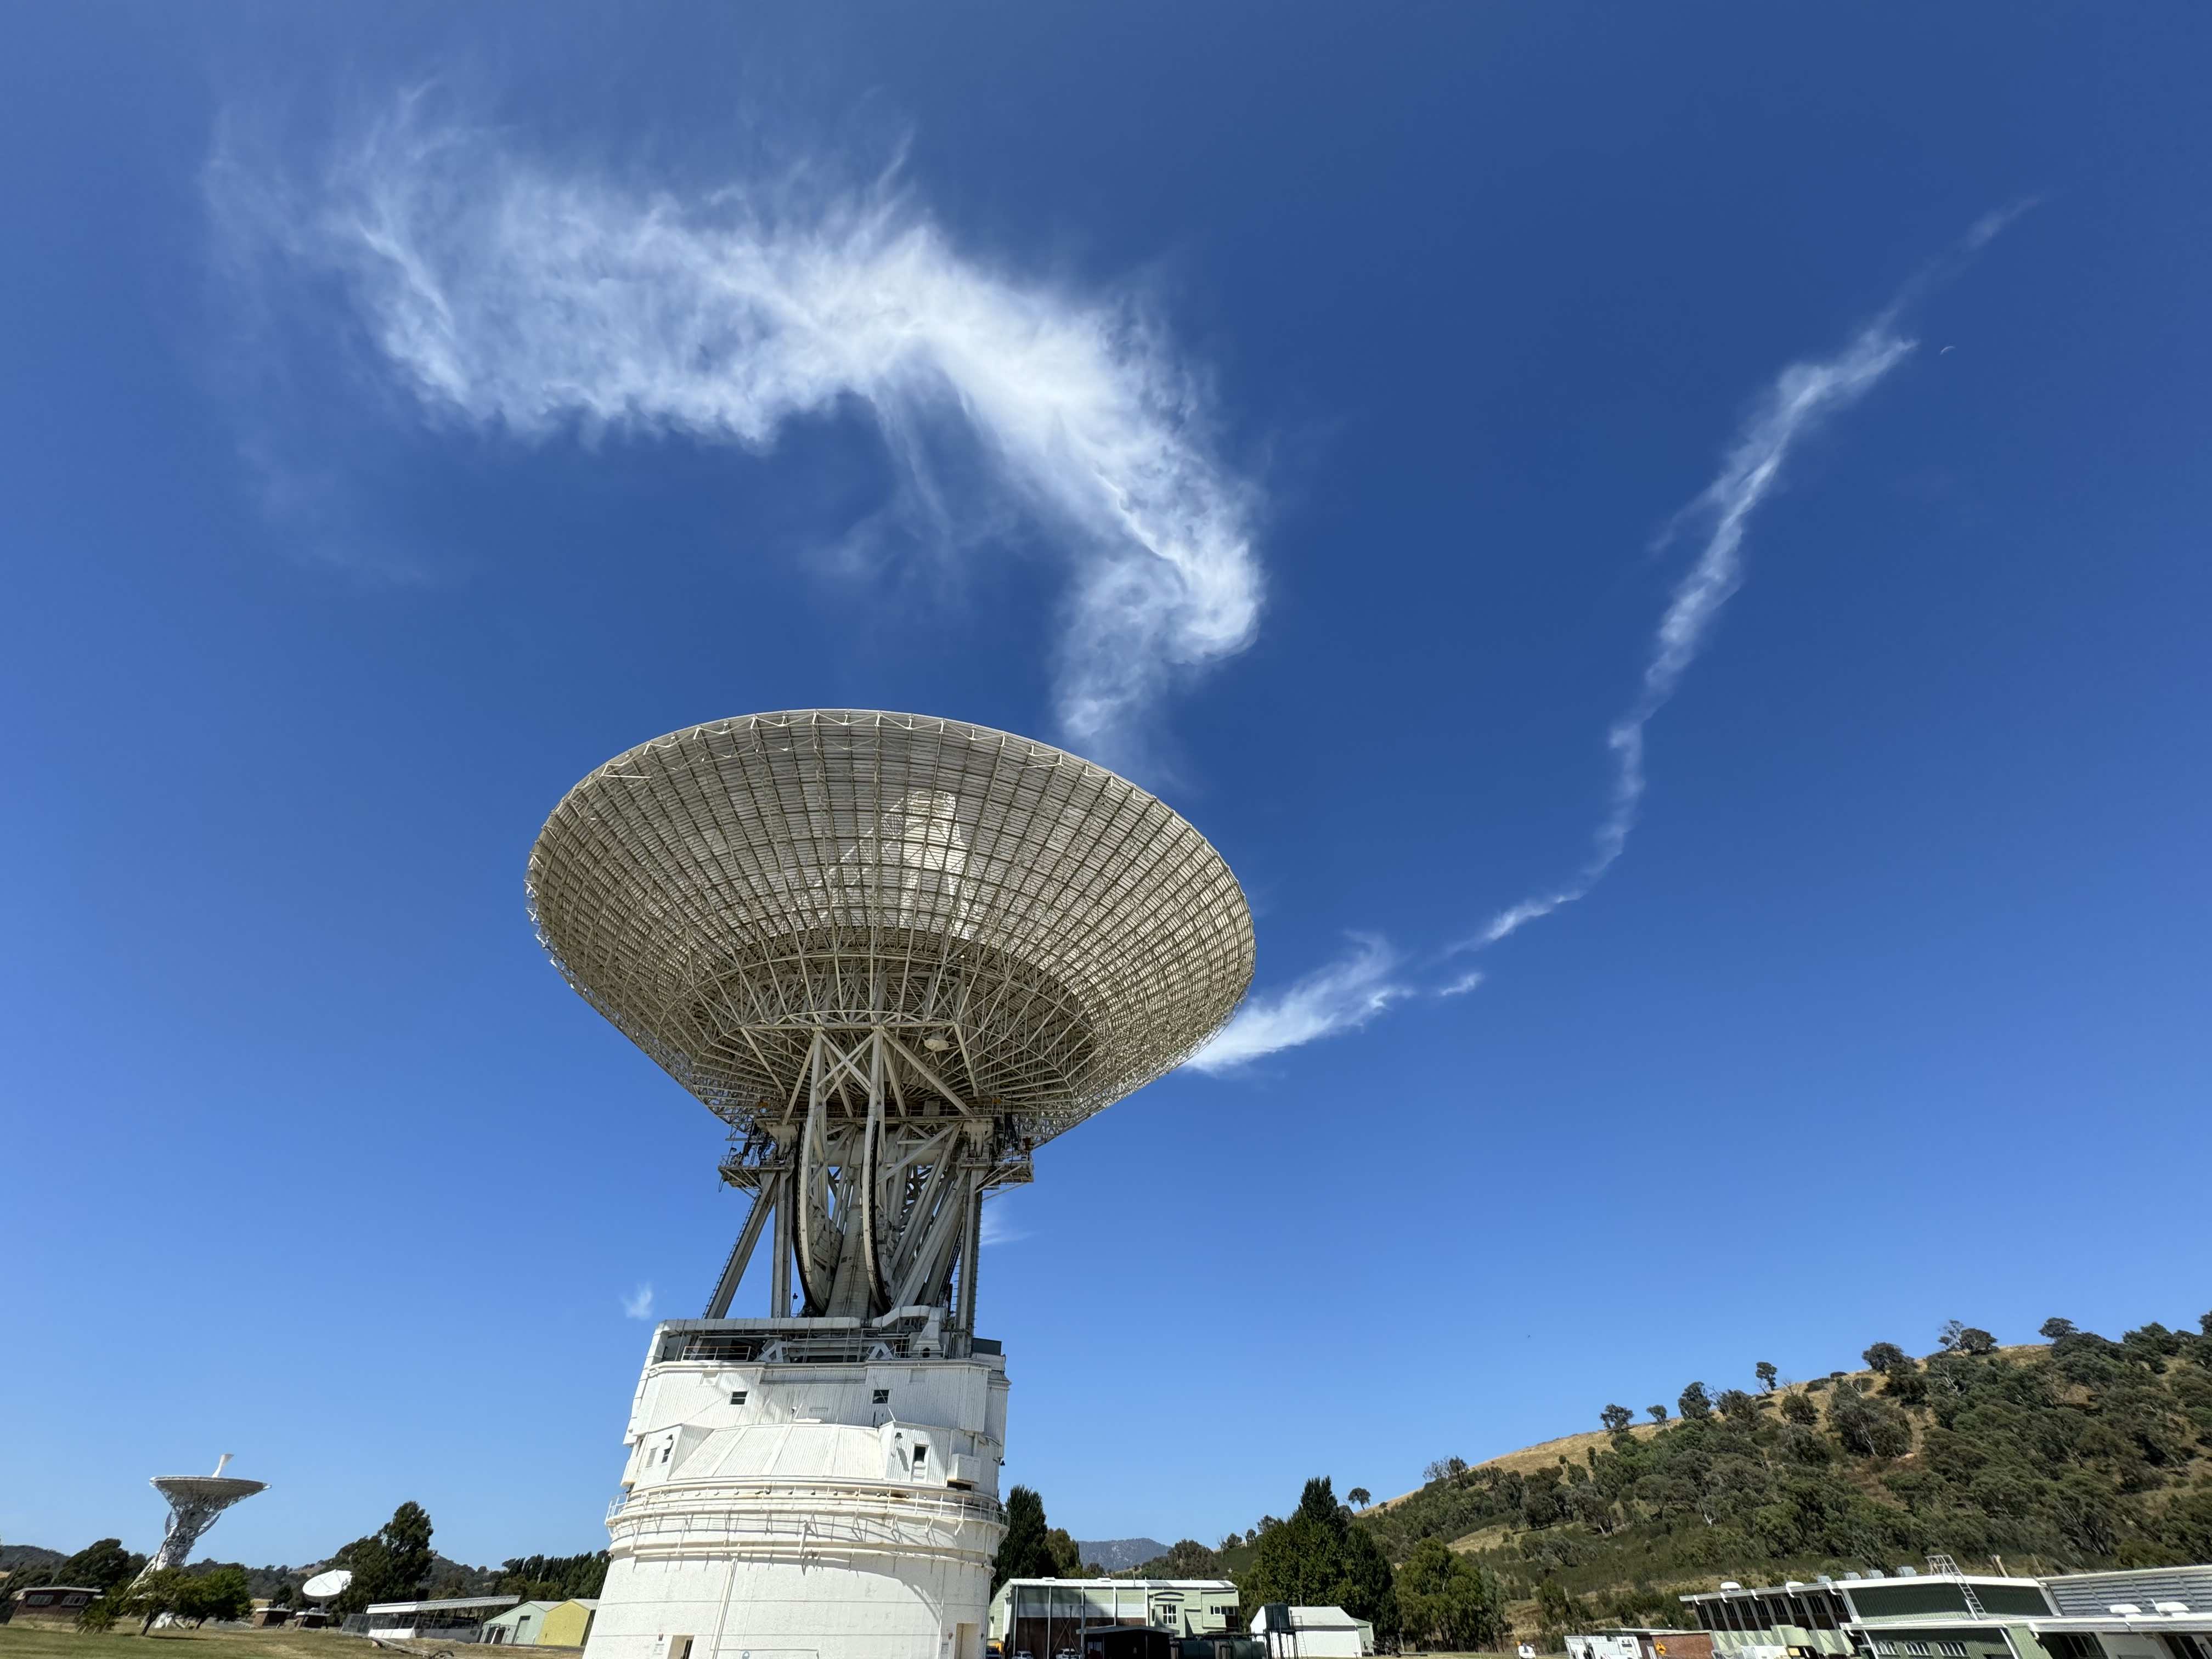 The 70m DSS-43 antenna of the Canberra Deep Space Communication Complex with wisps of cloud in the background.